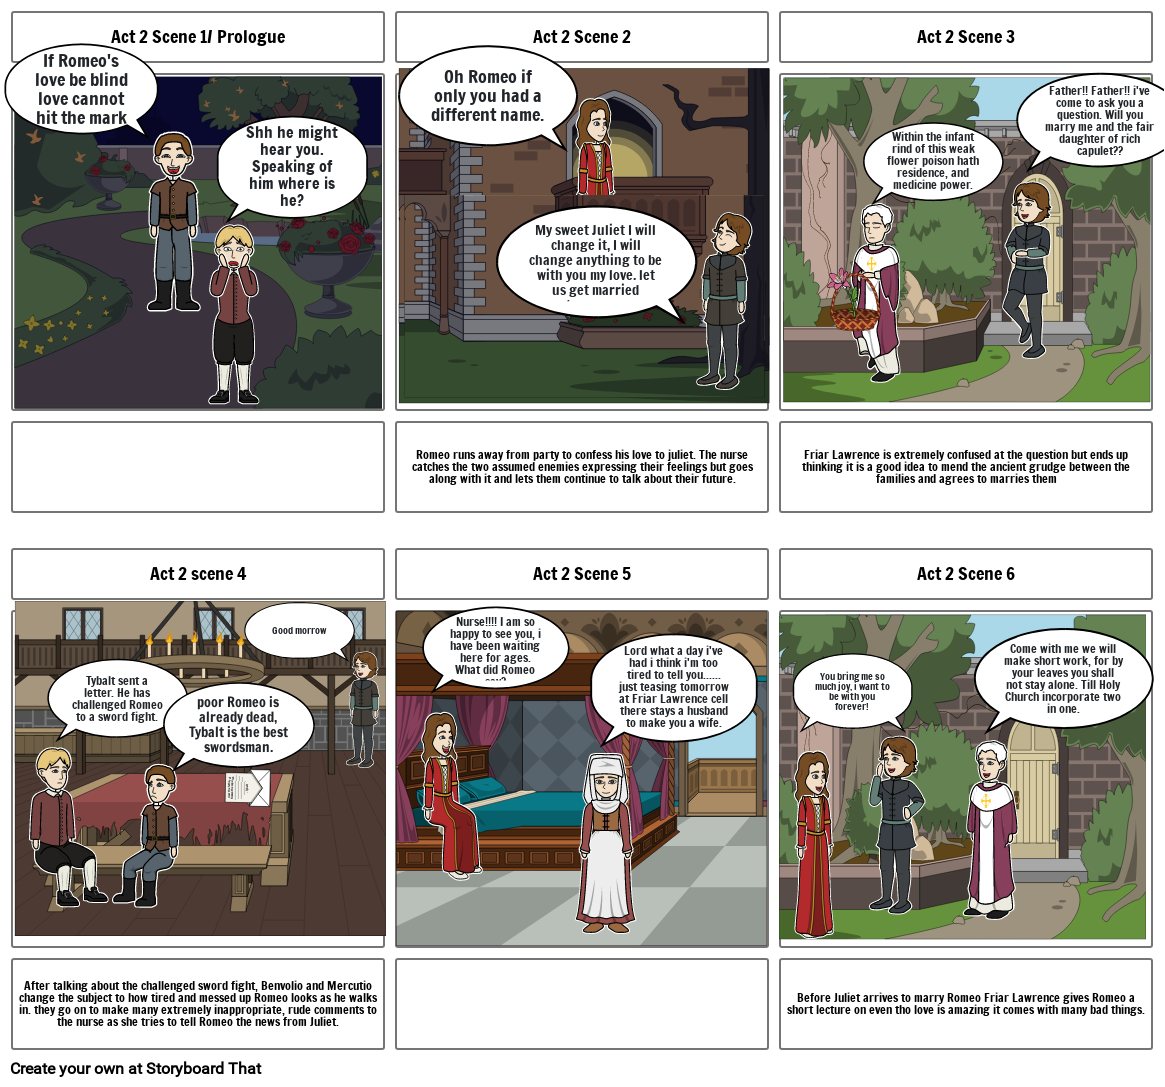 Ceilee- Act 2 scenes 1,2,3,4,5 and Prologue Storyboard